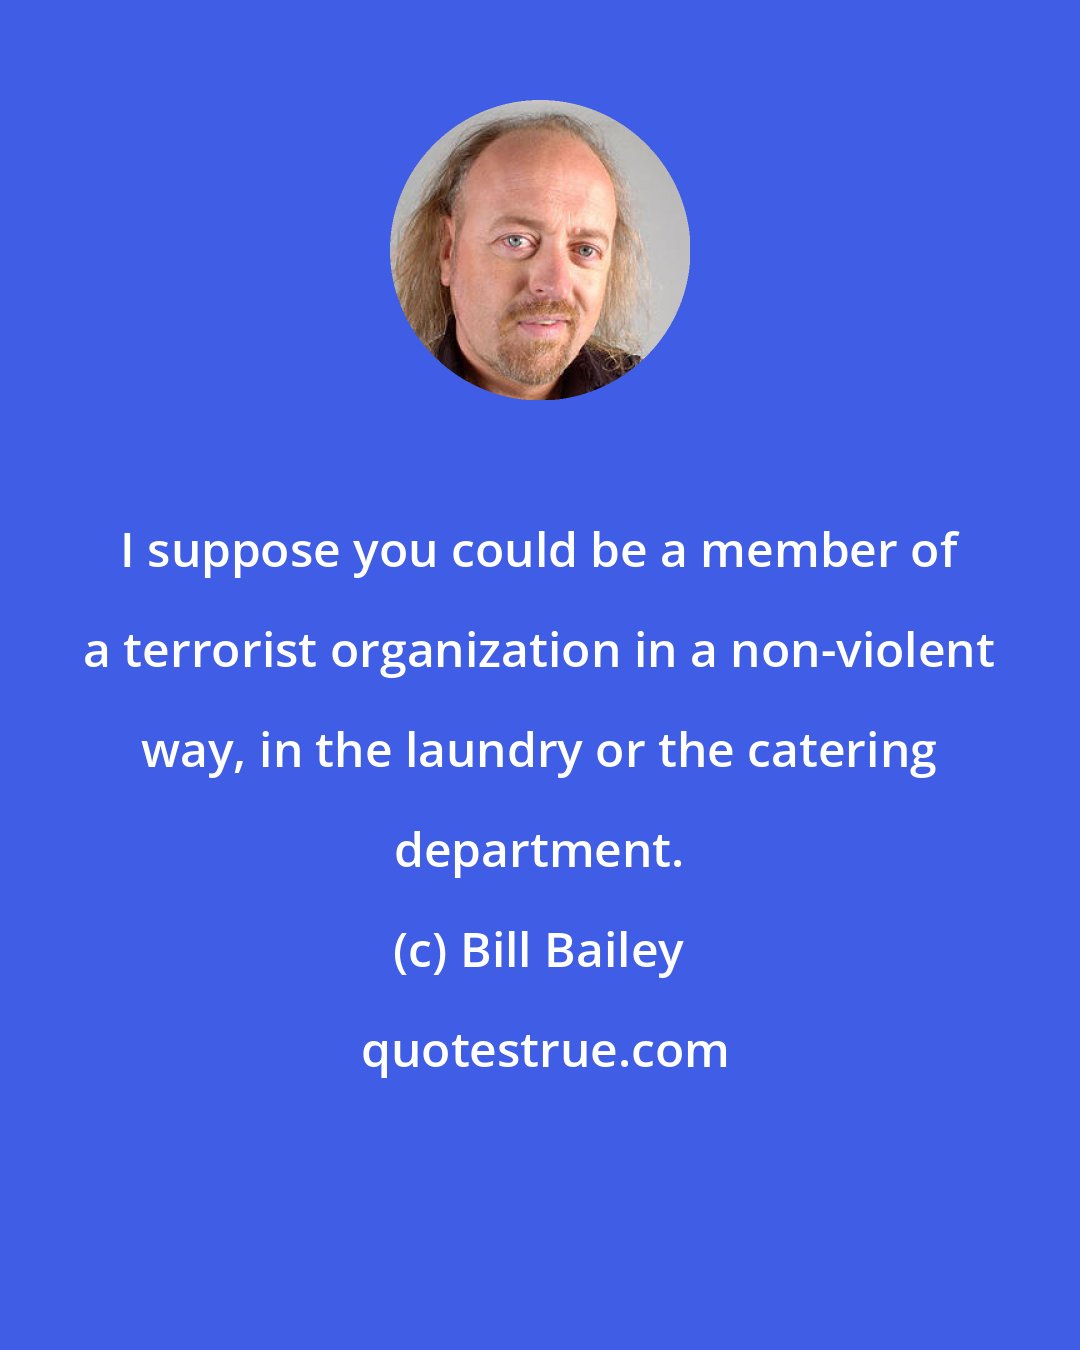 Bill Bailey: I suppose you could be a member of a terrorist organization in a non-violent way, in the laundry or the catering department.